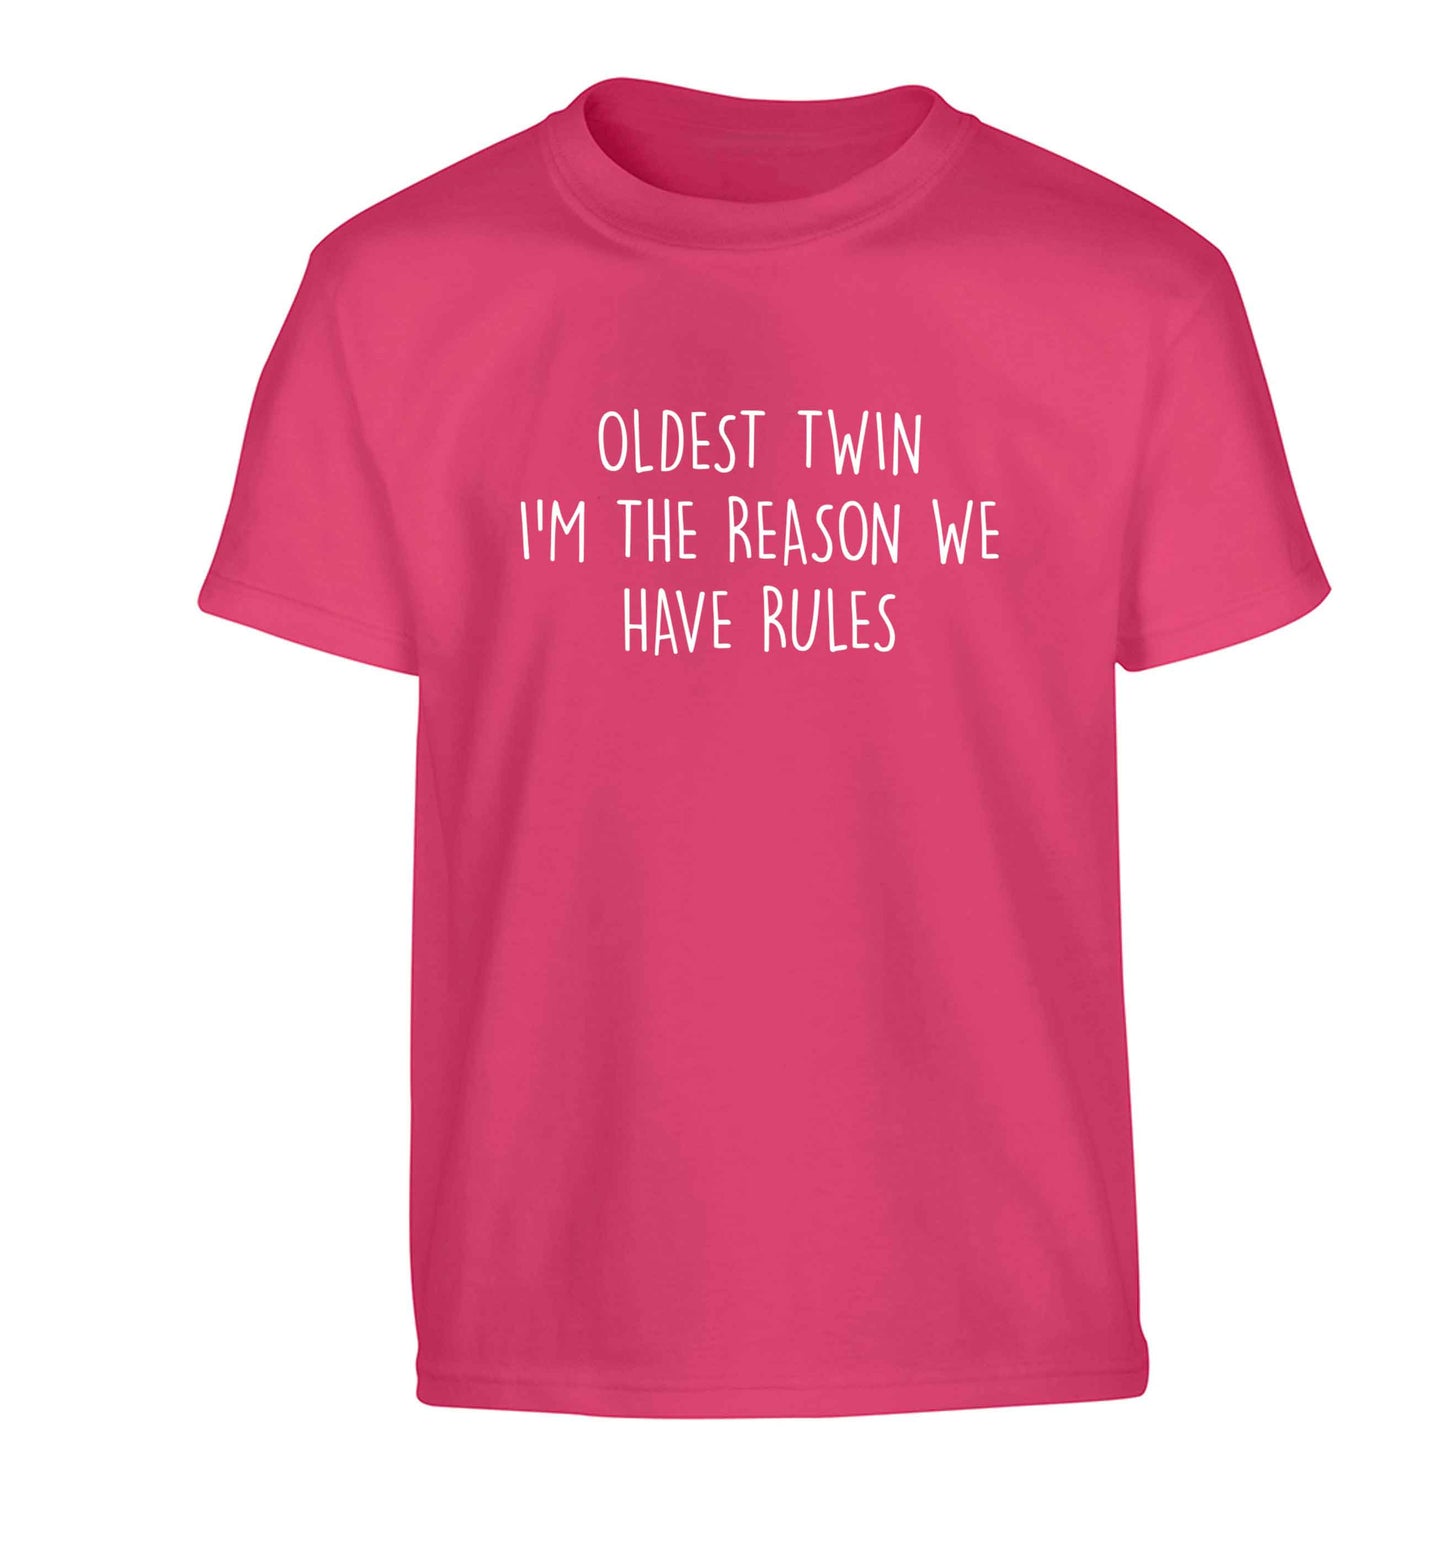 Oldest twin I'm the reason we have rules Children's pink Tshirt 12-13 Years